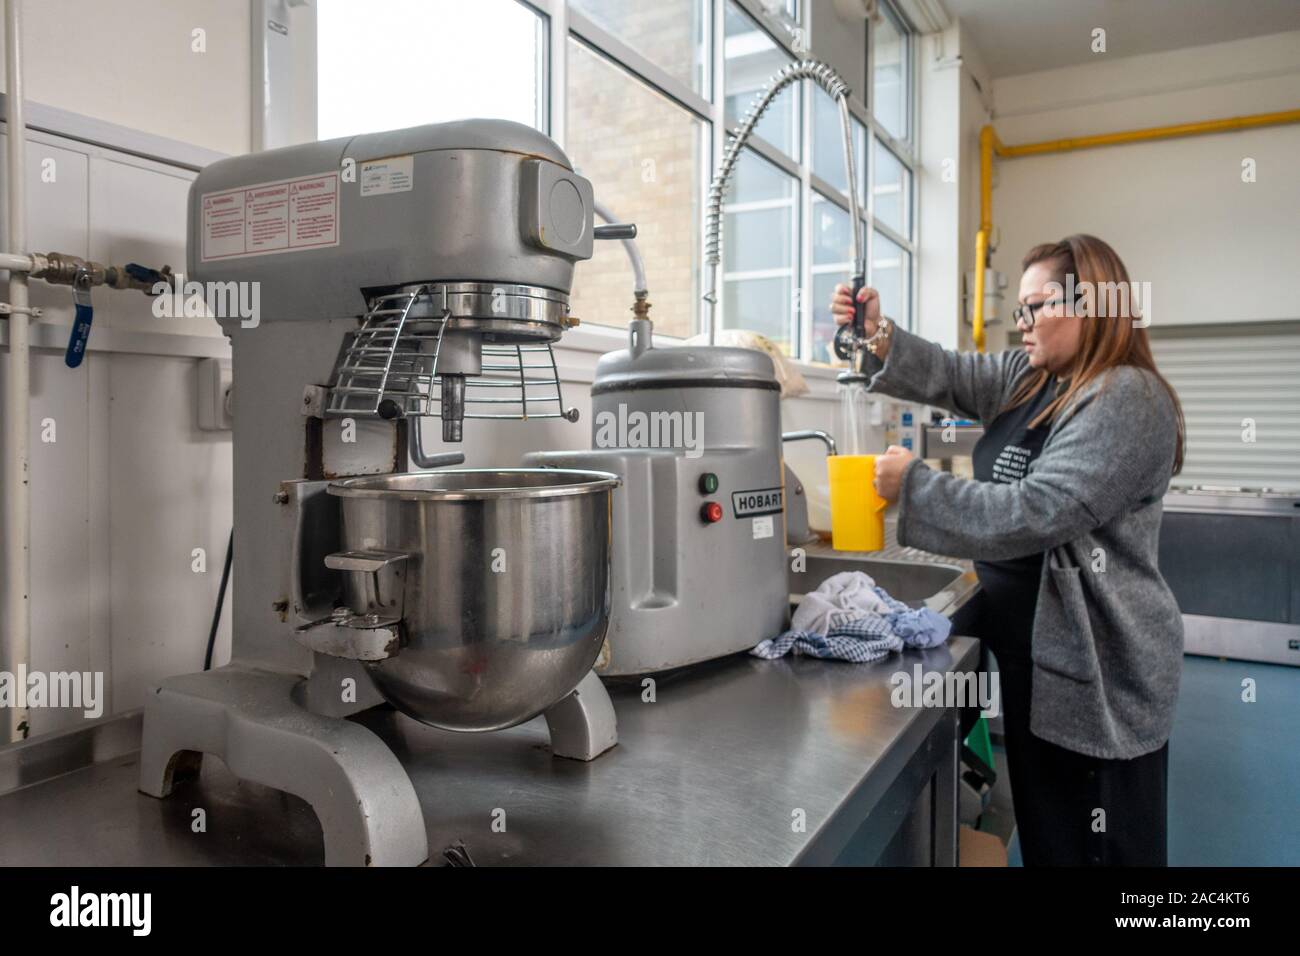 A lady gets water in a jug from a tap in a canteen kitchen. Equipment including an industrial food processor sit on a stainless steel worktop. Stock Photo